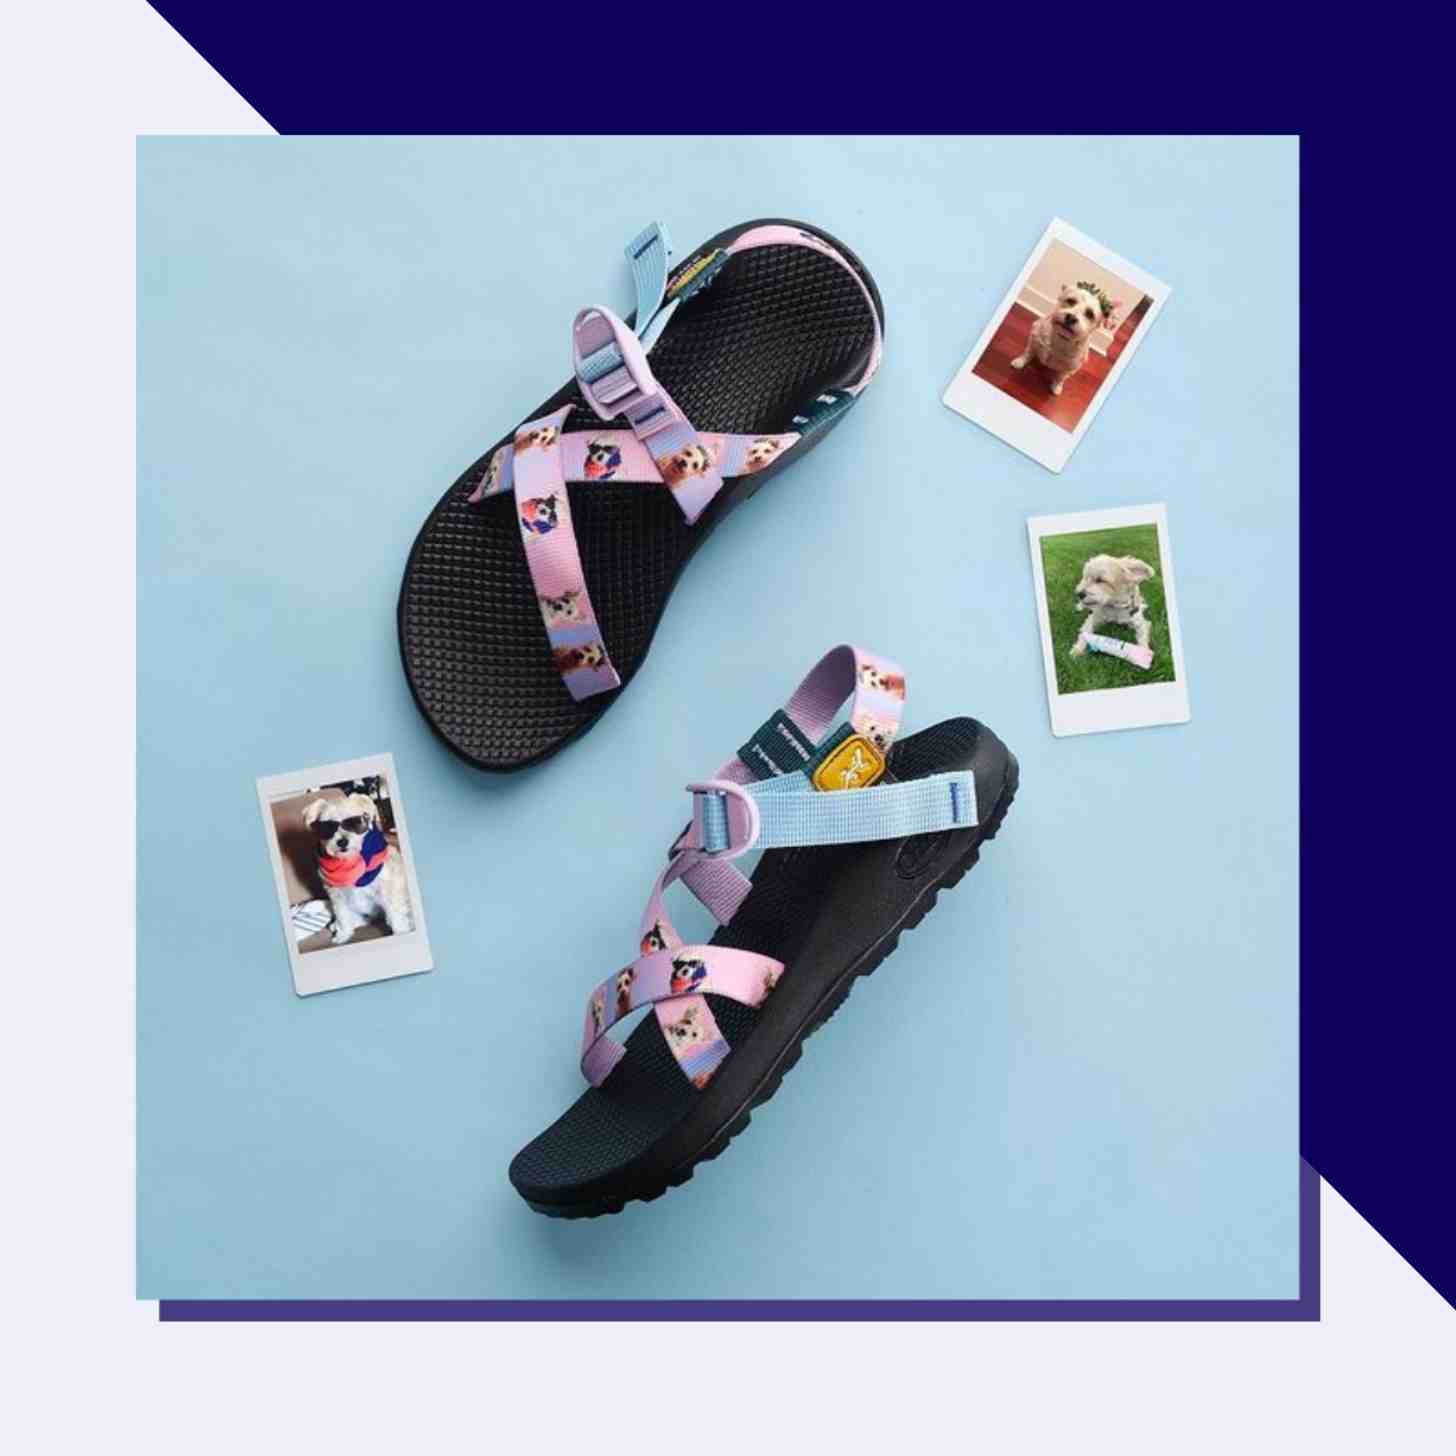 A Pair Of Custom Designed Shaco Sandals With Pictures Of Cute And Funny Dogs